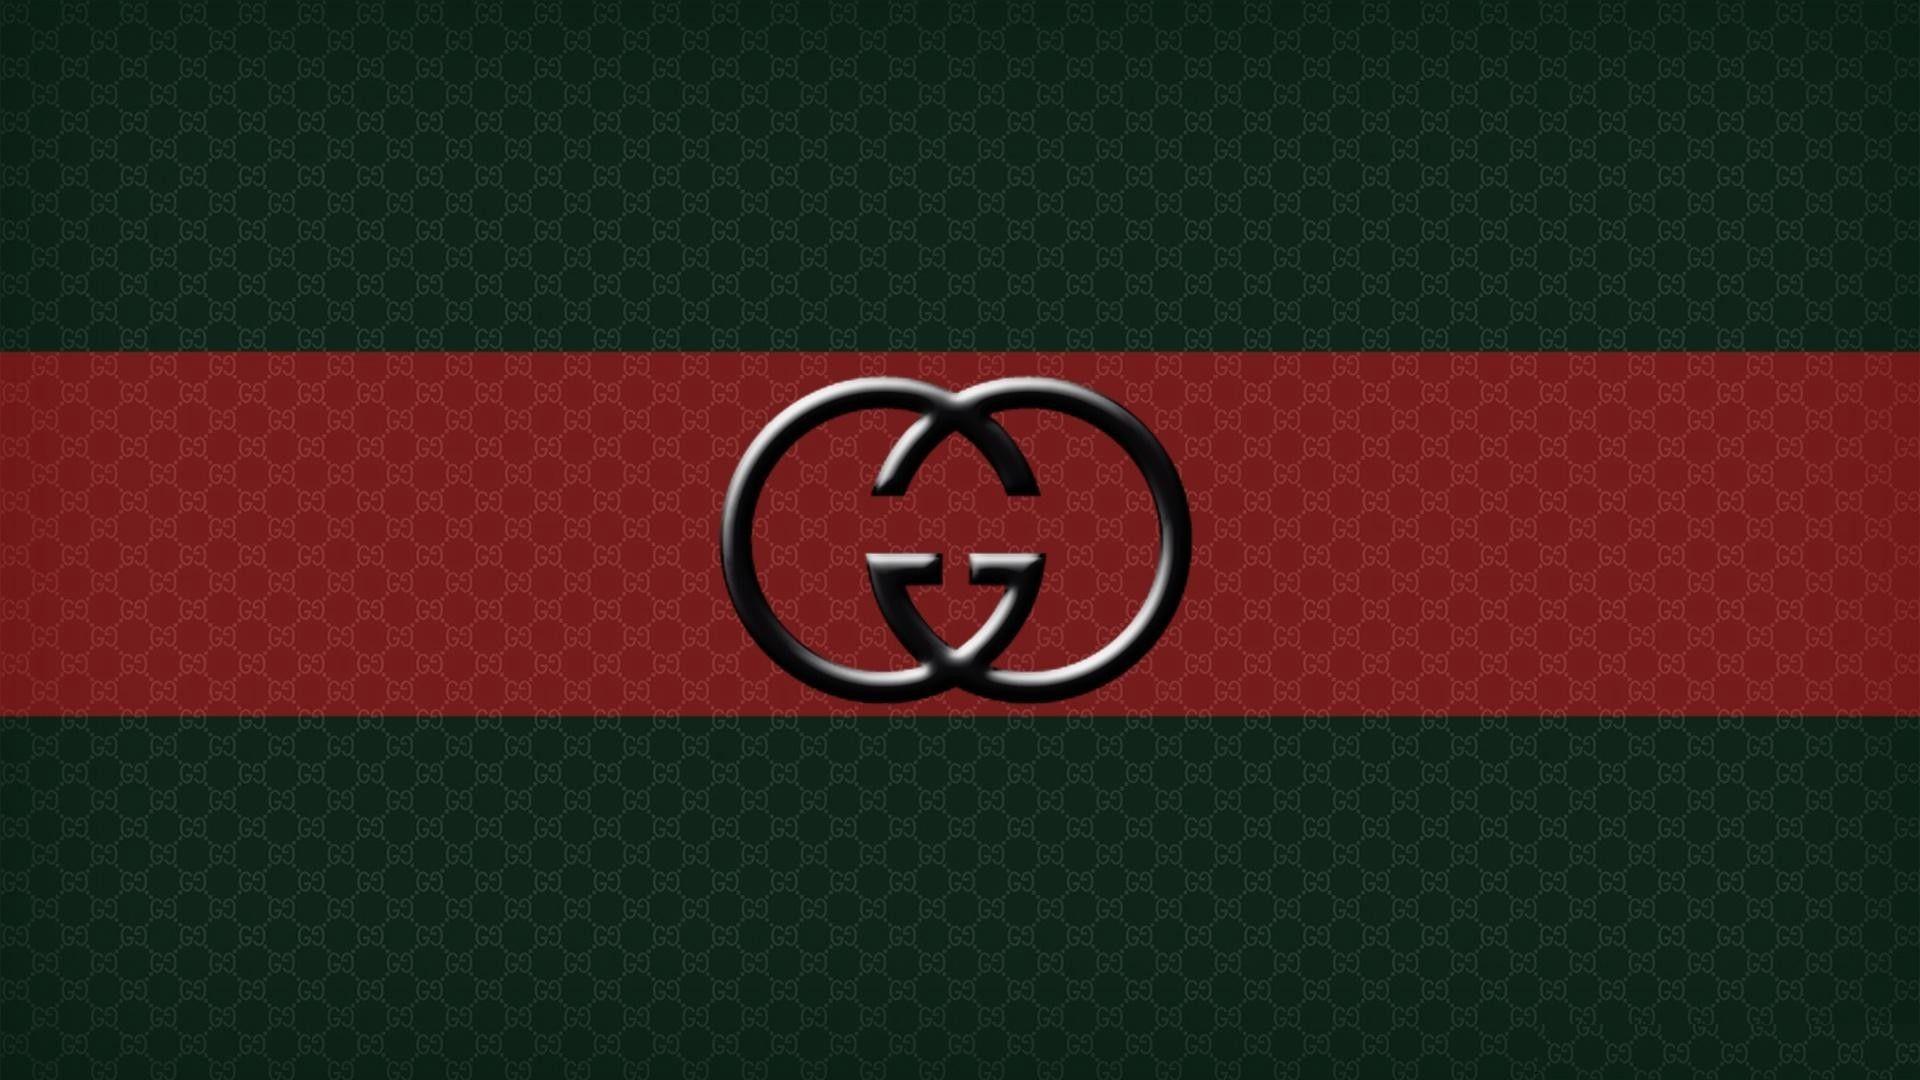 750x1334 Supreme And Gucci Wallpapers - Wallpaper Cave